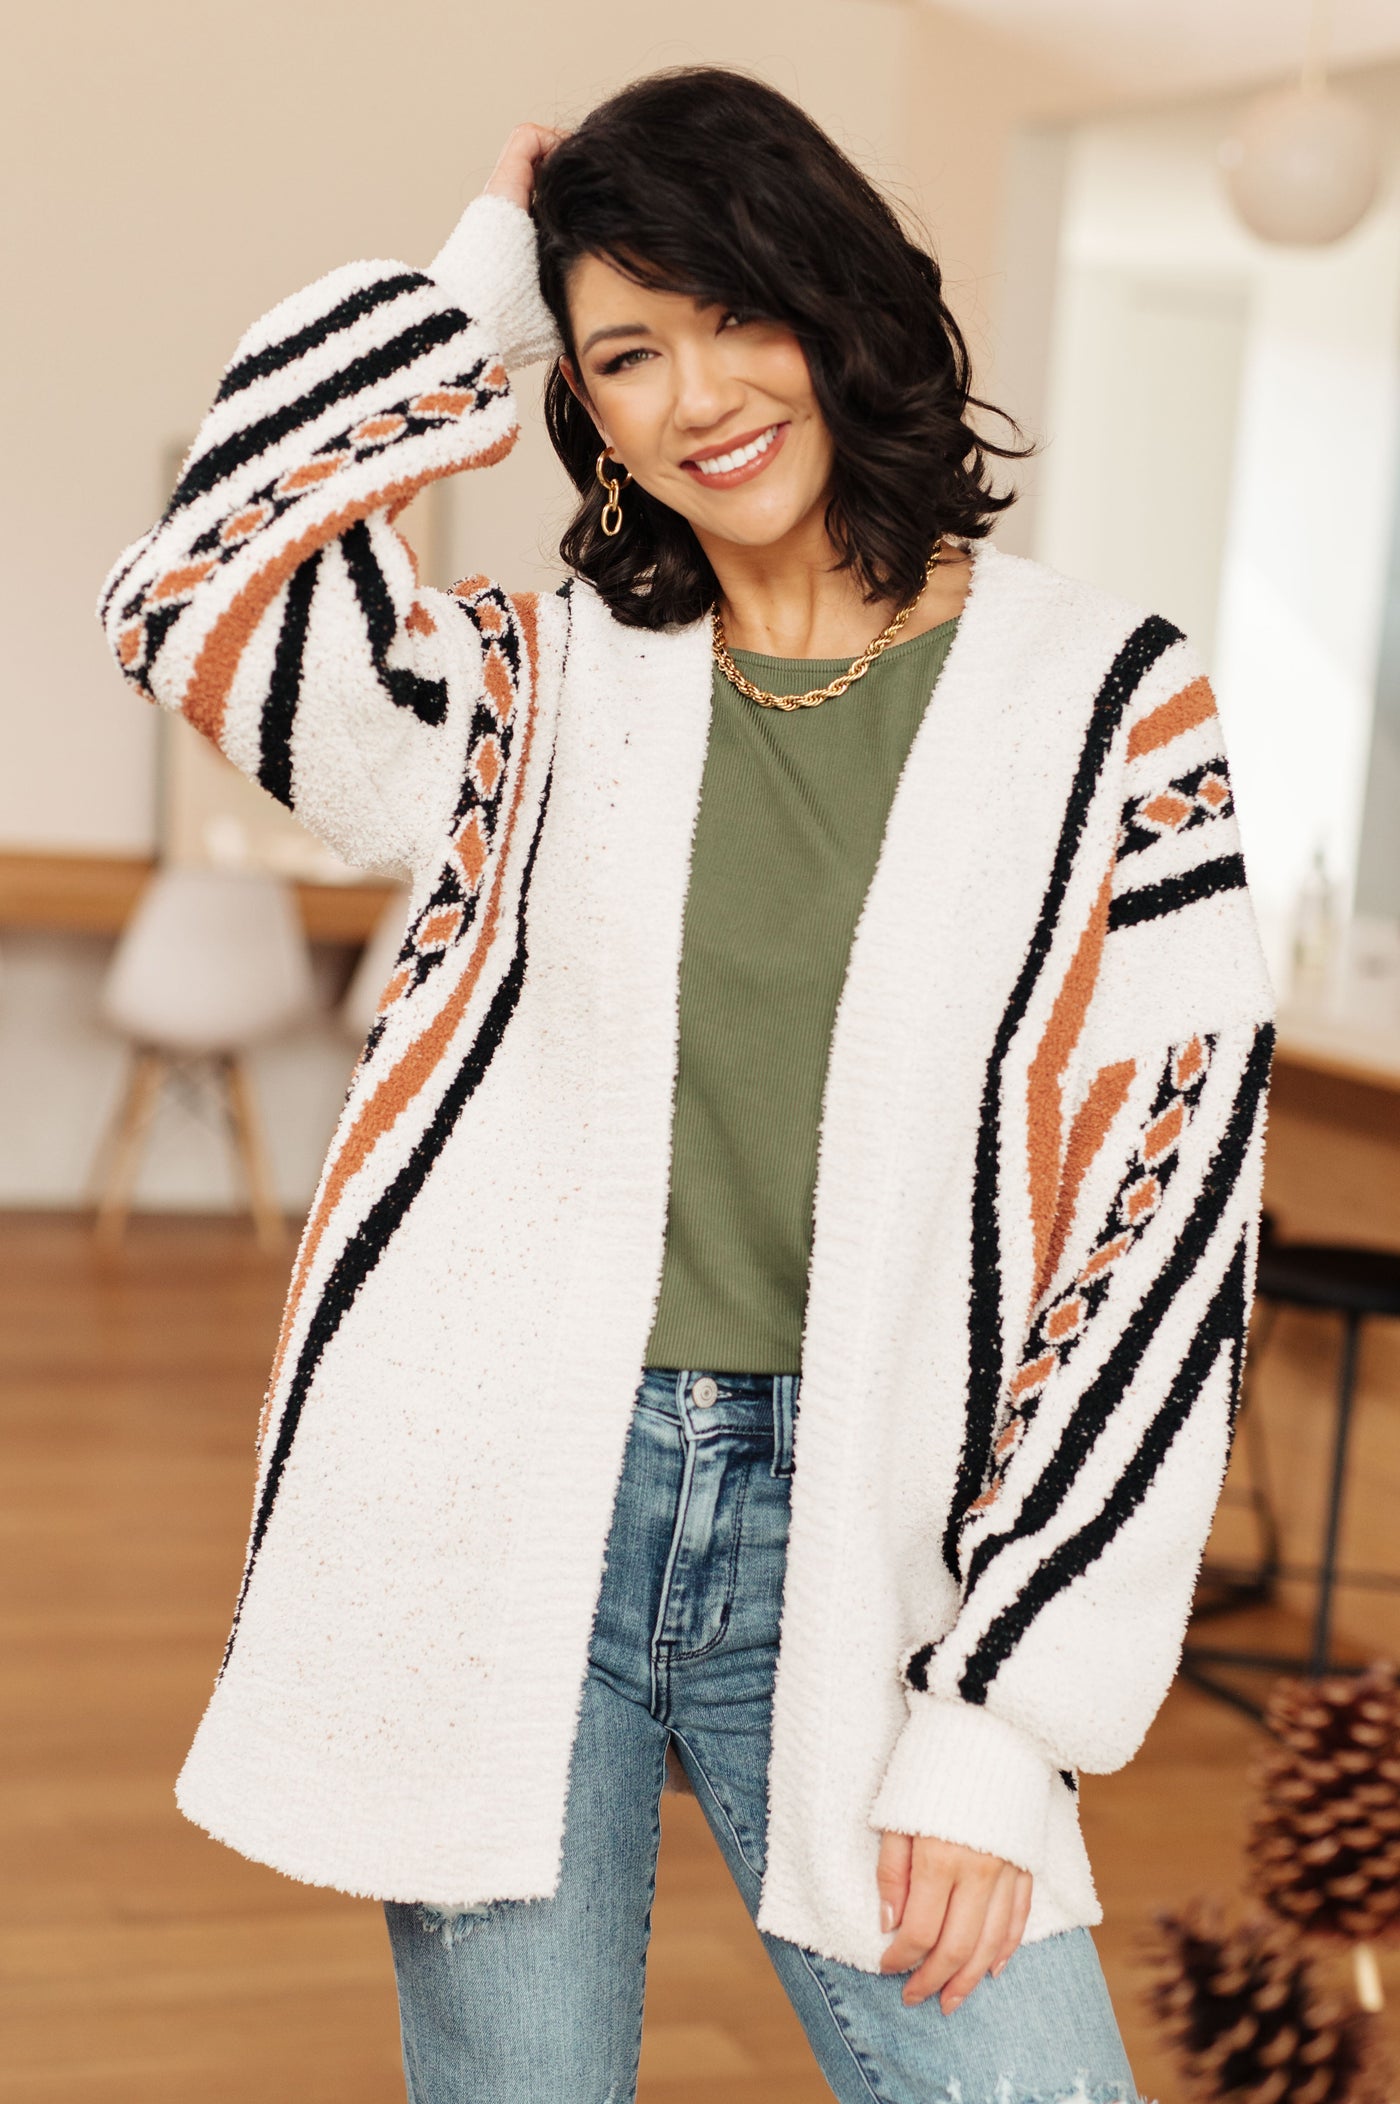 This cardigan is sure to become your new go-to. The Holding On Aztec Print Cardigan features a super soft sweater knit that provides warmth and comfort